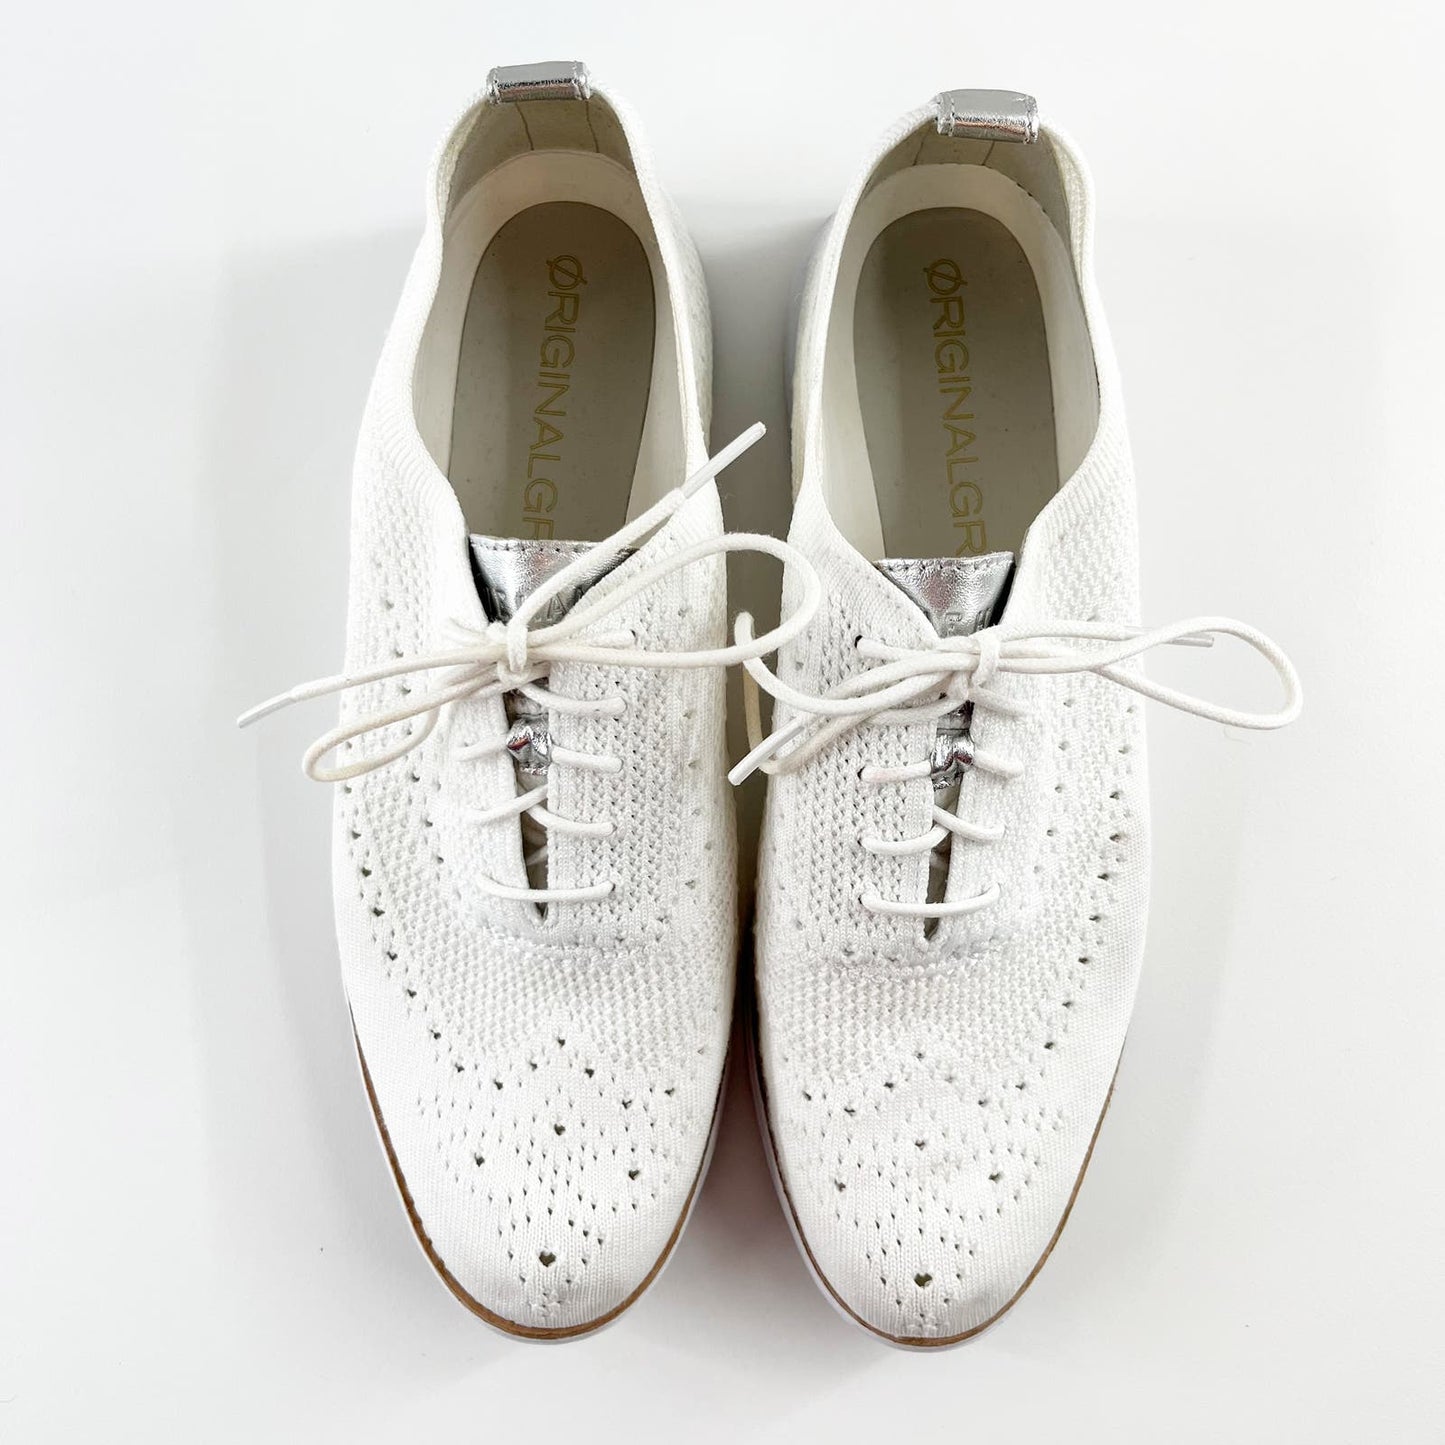 Cole Haan Original Grand Lace Up Shoes Sneakers Oxfords White 9.5